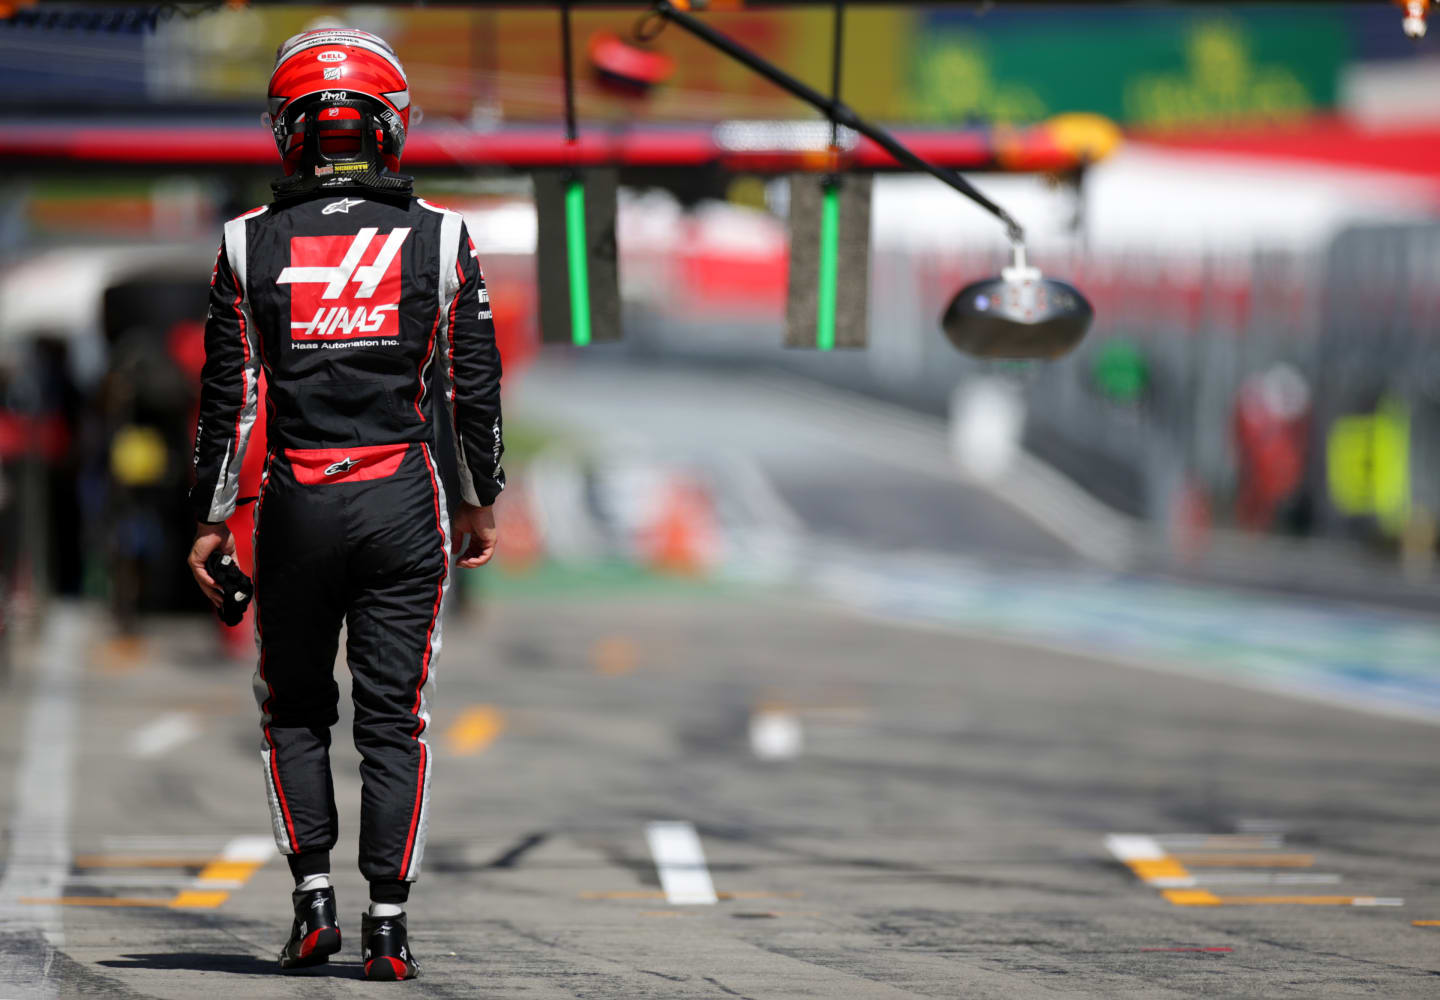 SPIELBERG, AUSTRIA - JULY 04:  Kevin Magnussen of Denmark and Haas F1 walks through the pit lane during qualifying for the Formula One Grand Prix of Austria at Red Bull Ring on July 04, 2020 in Spielberg, Austria. (Photo by Peter Fox/Getty Images)